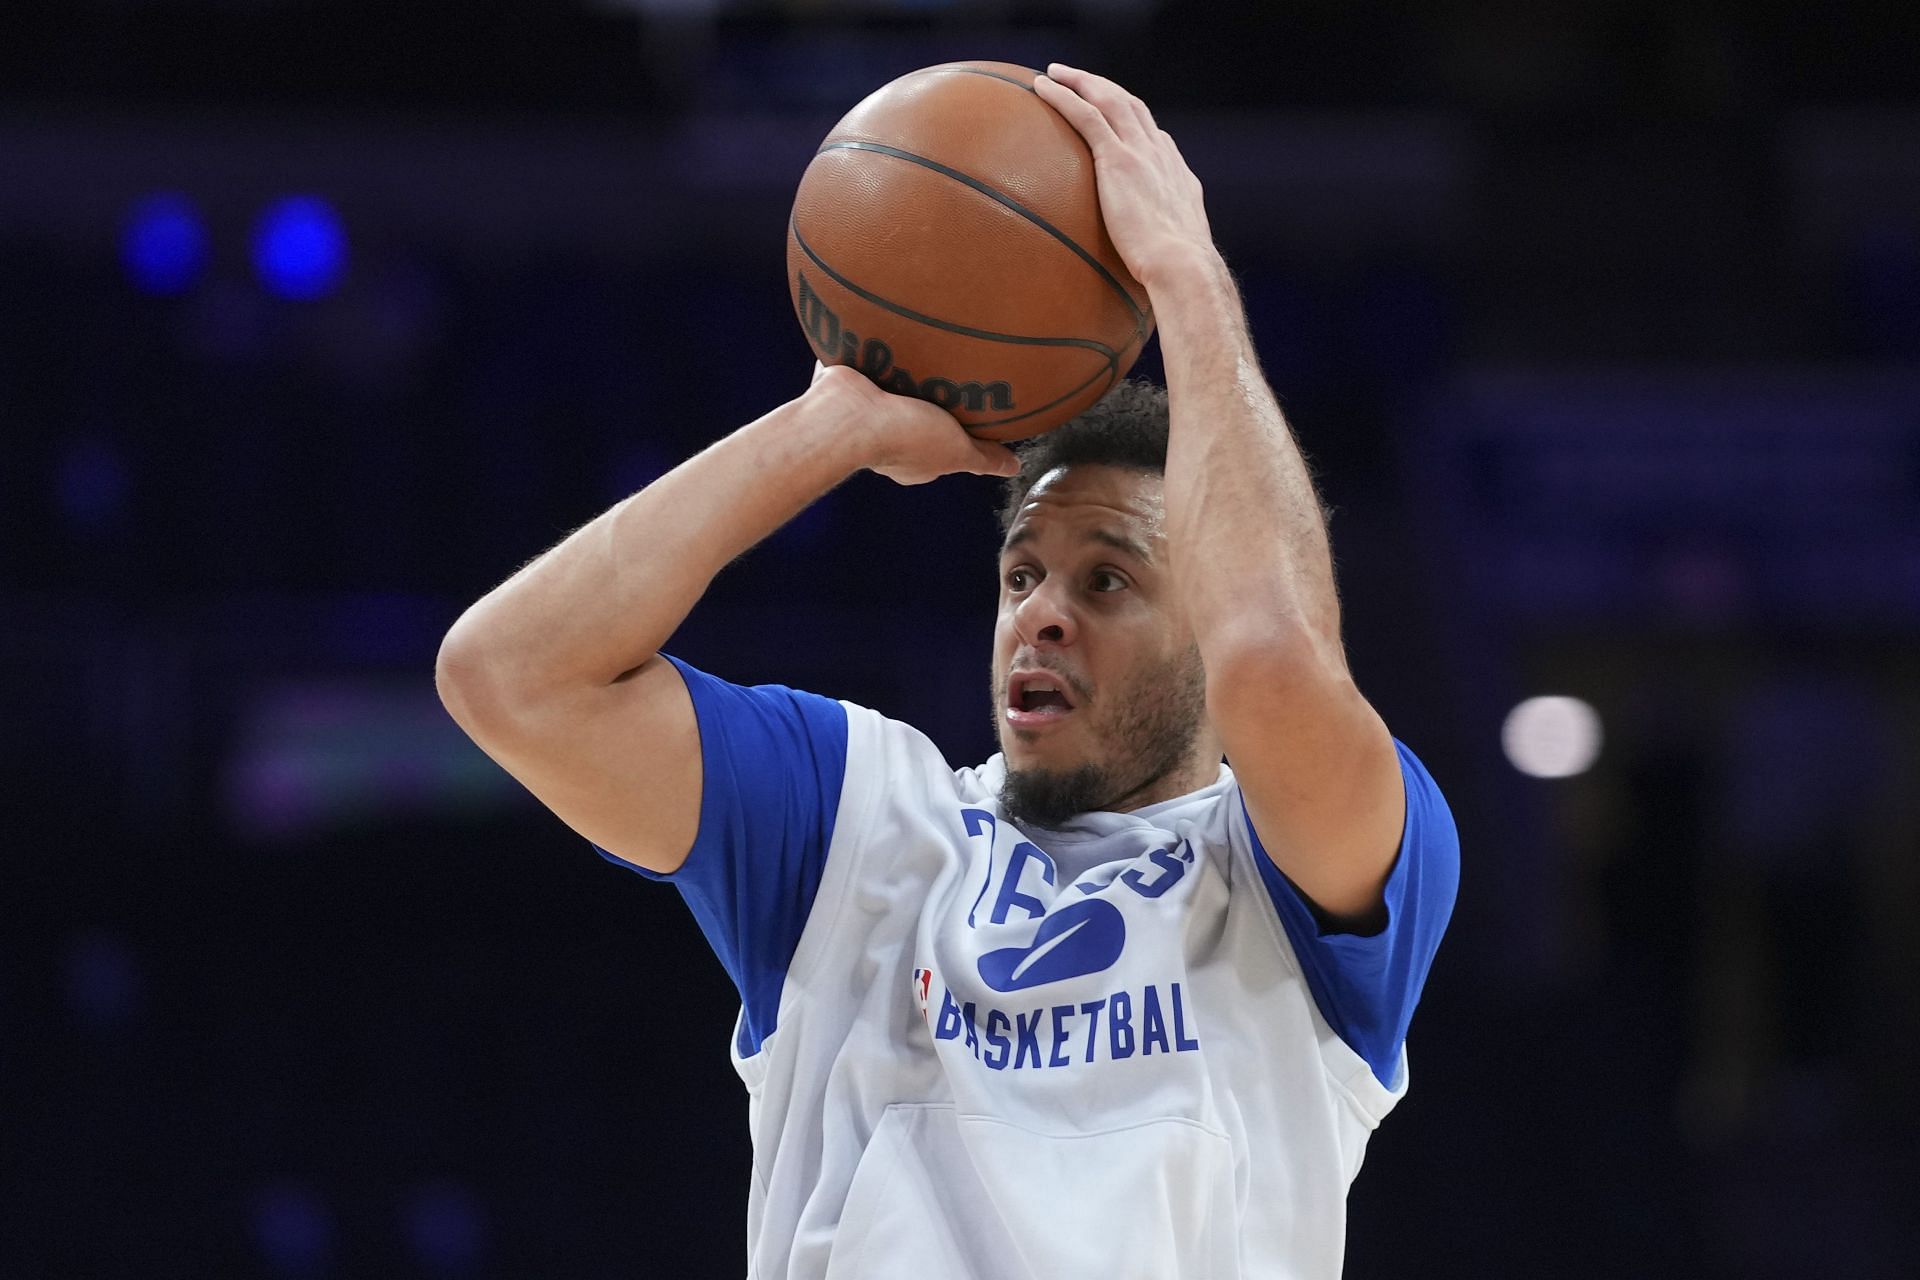 Seth Curry of the Philadelphia 76ers warms up